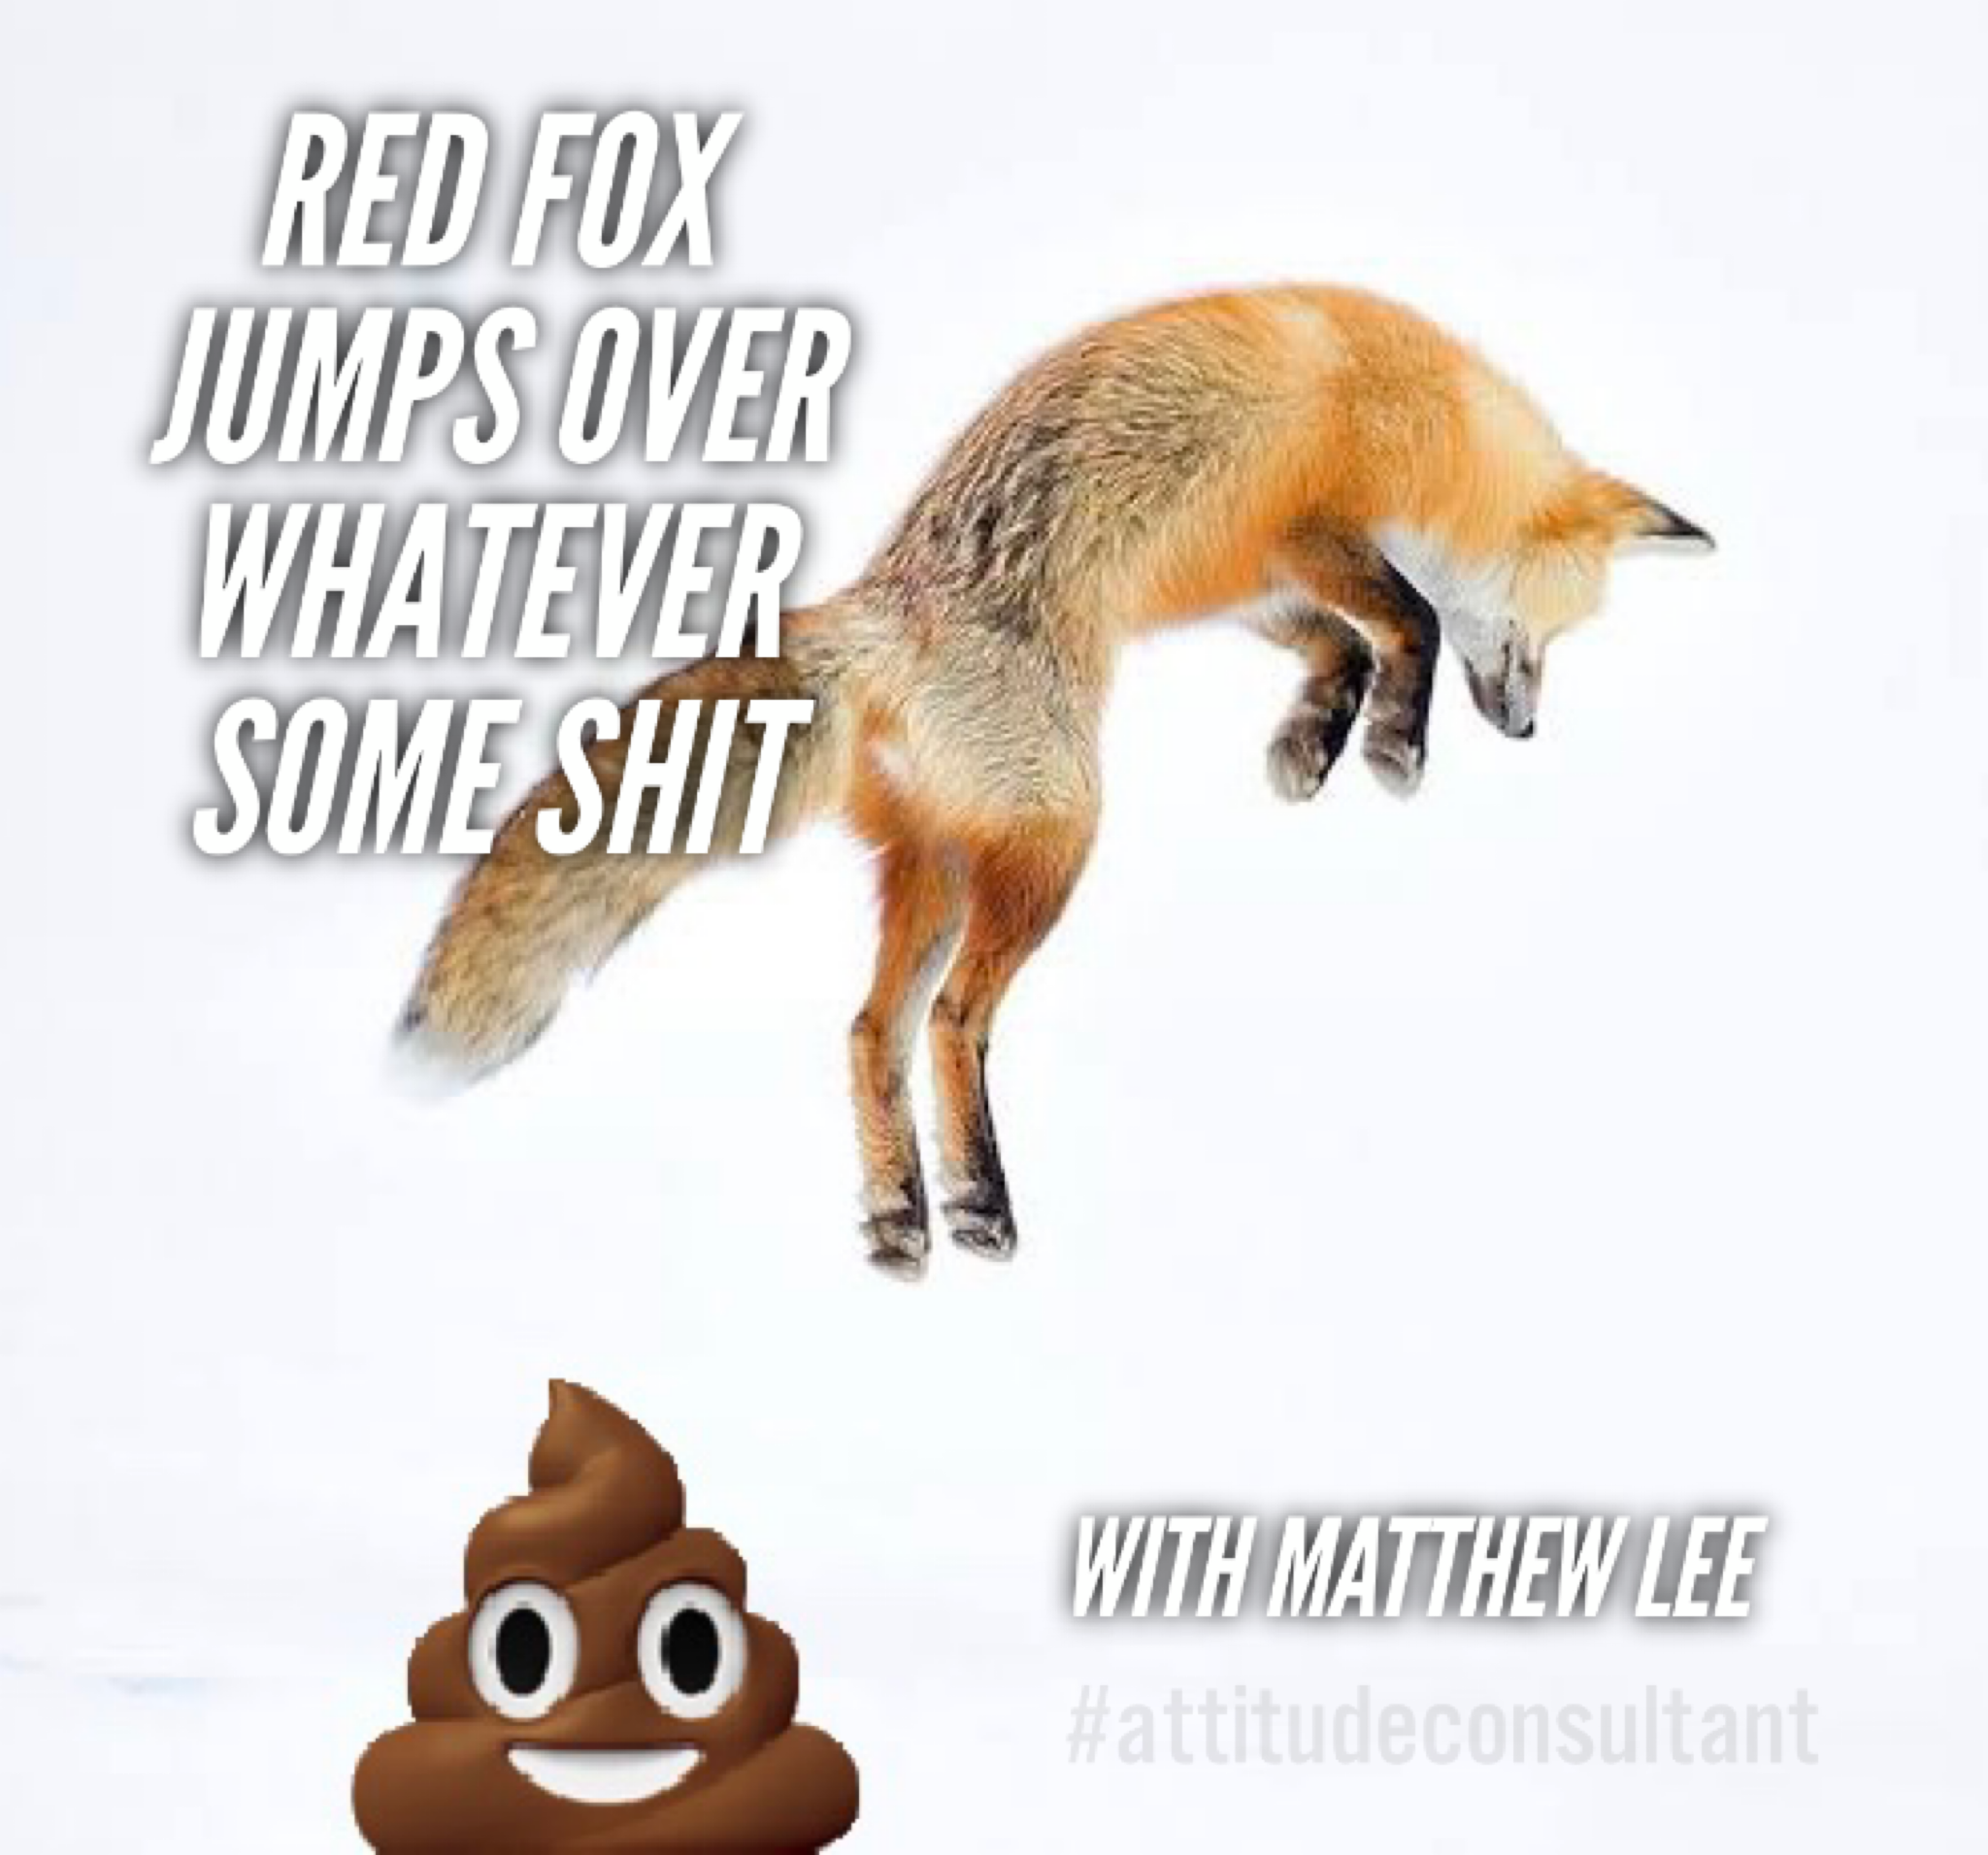 Red Fox Jumps Over Whatever Some Shit